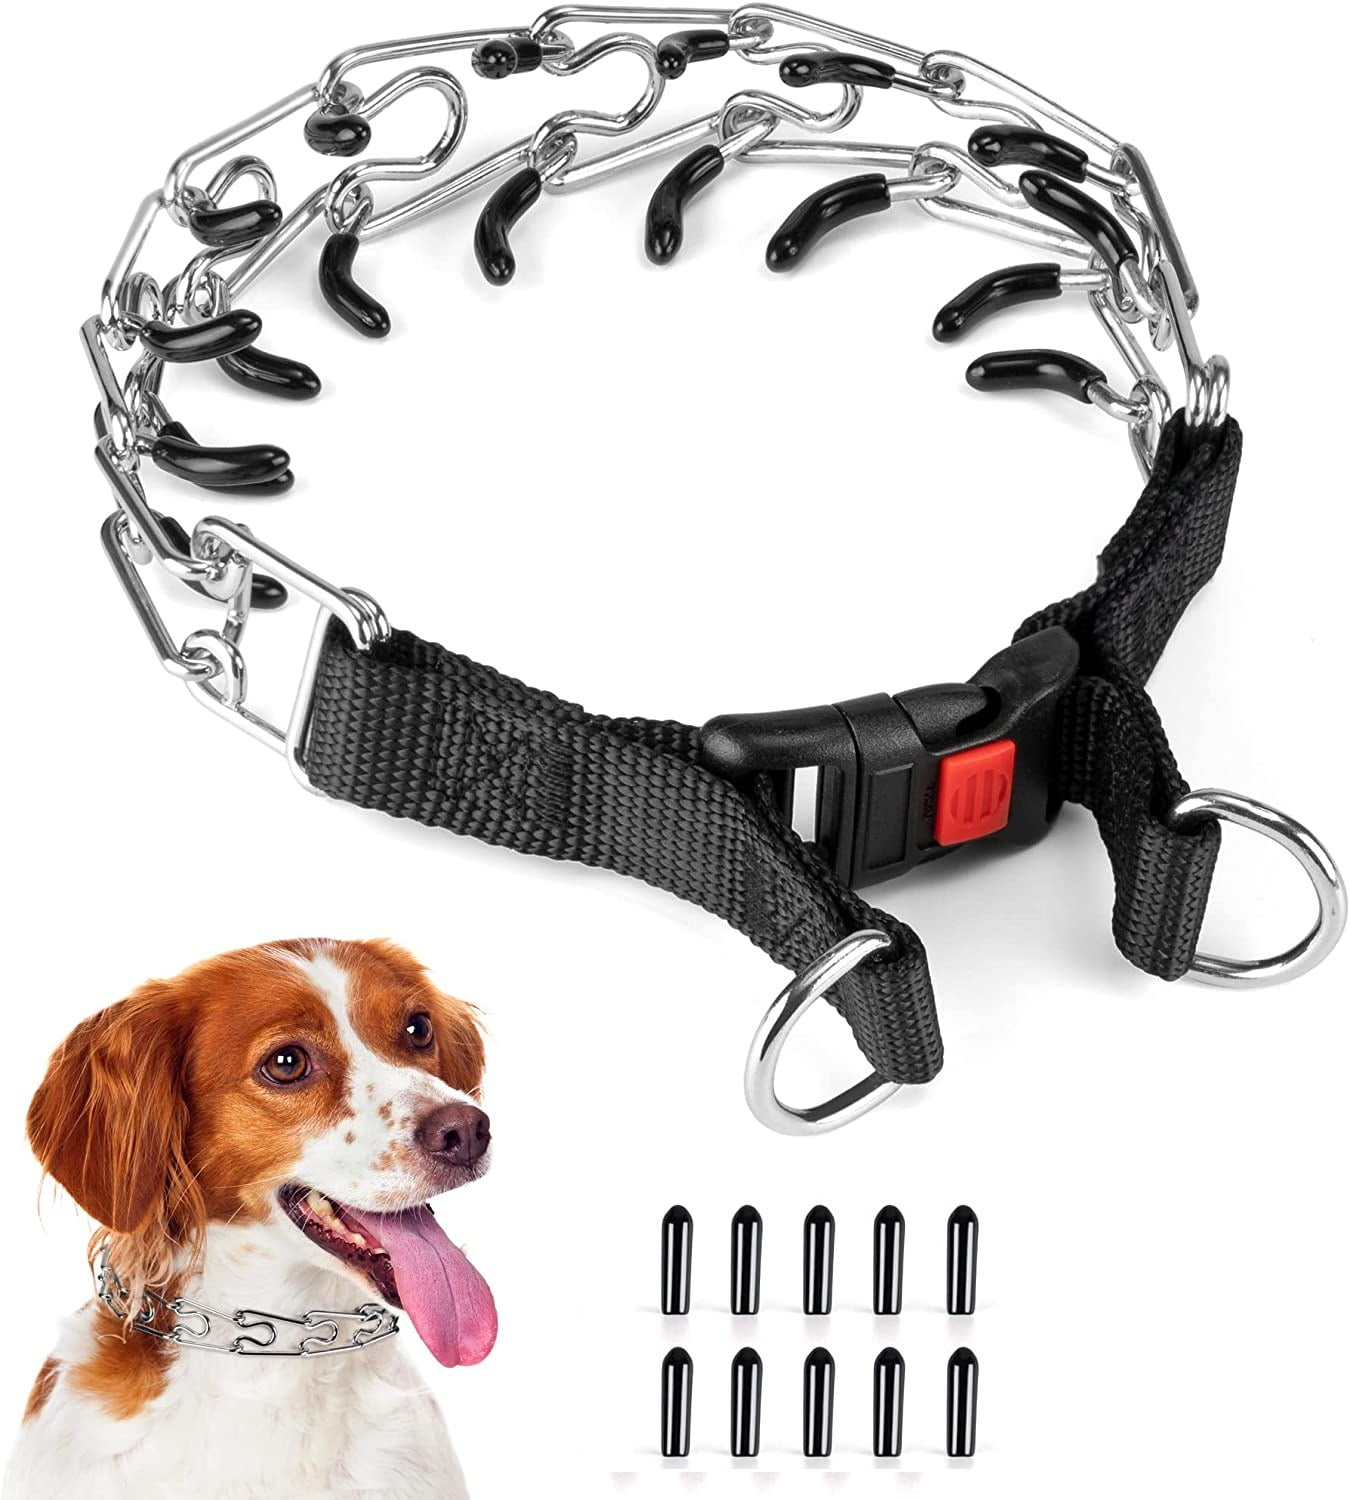 Lockable Quick Release Snap Buckle Adjustable Links with Safety Rubber Tips Dog Prong Collar Heavy Duty for Small Medium Large Dogs S Durable Dog Pinch Training Collar Chain 